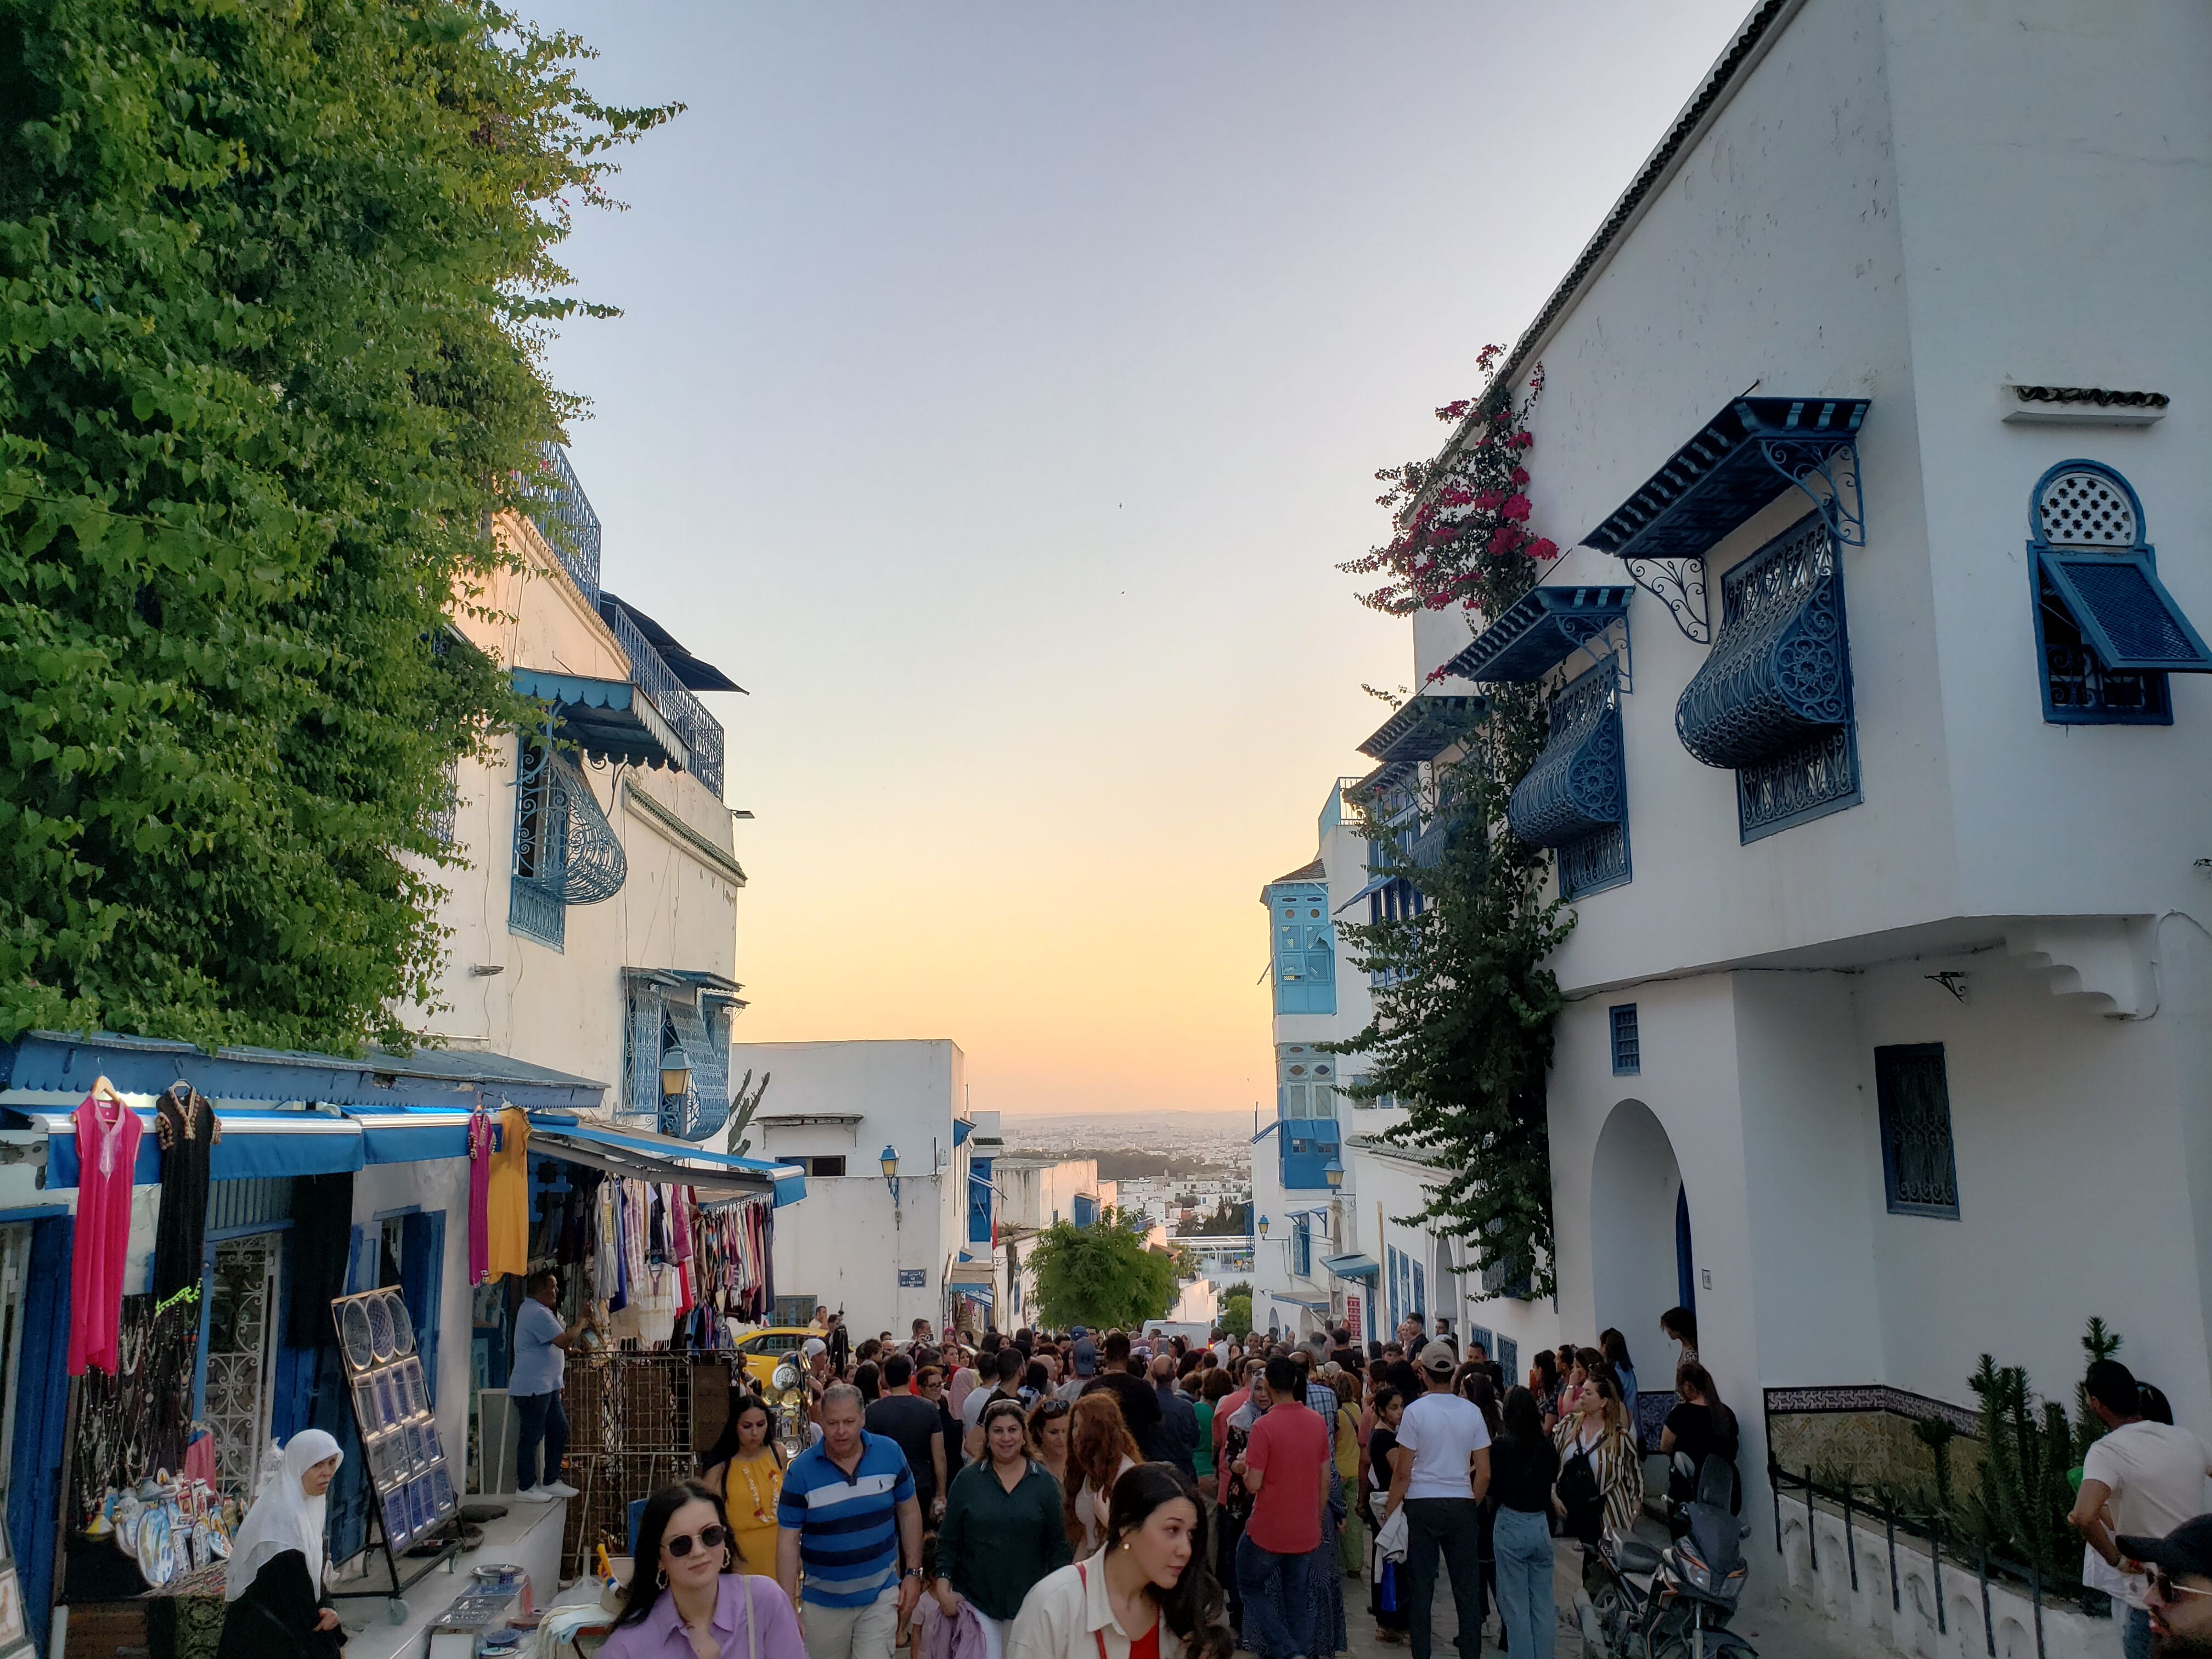 Crowded market street with traditional white and blue buildings at sunset, indicative of Mediterranean architecture.